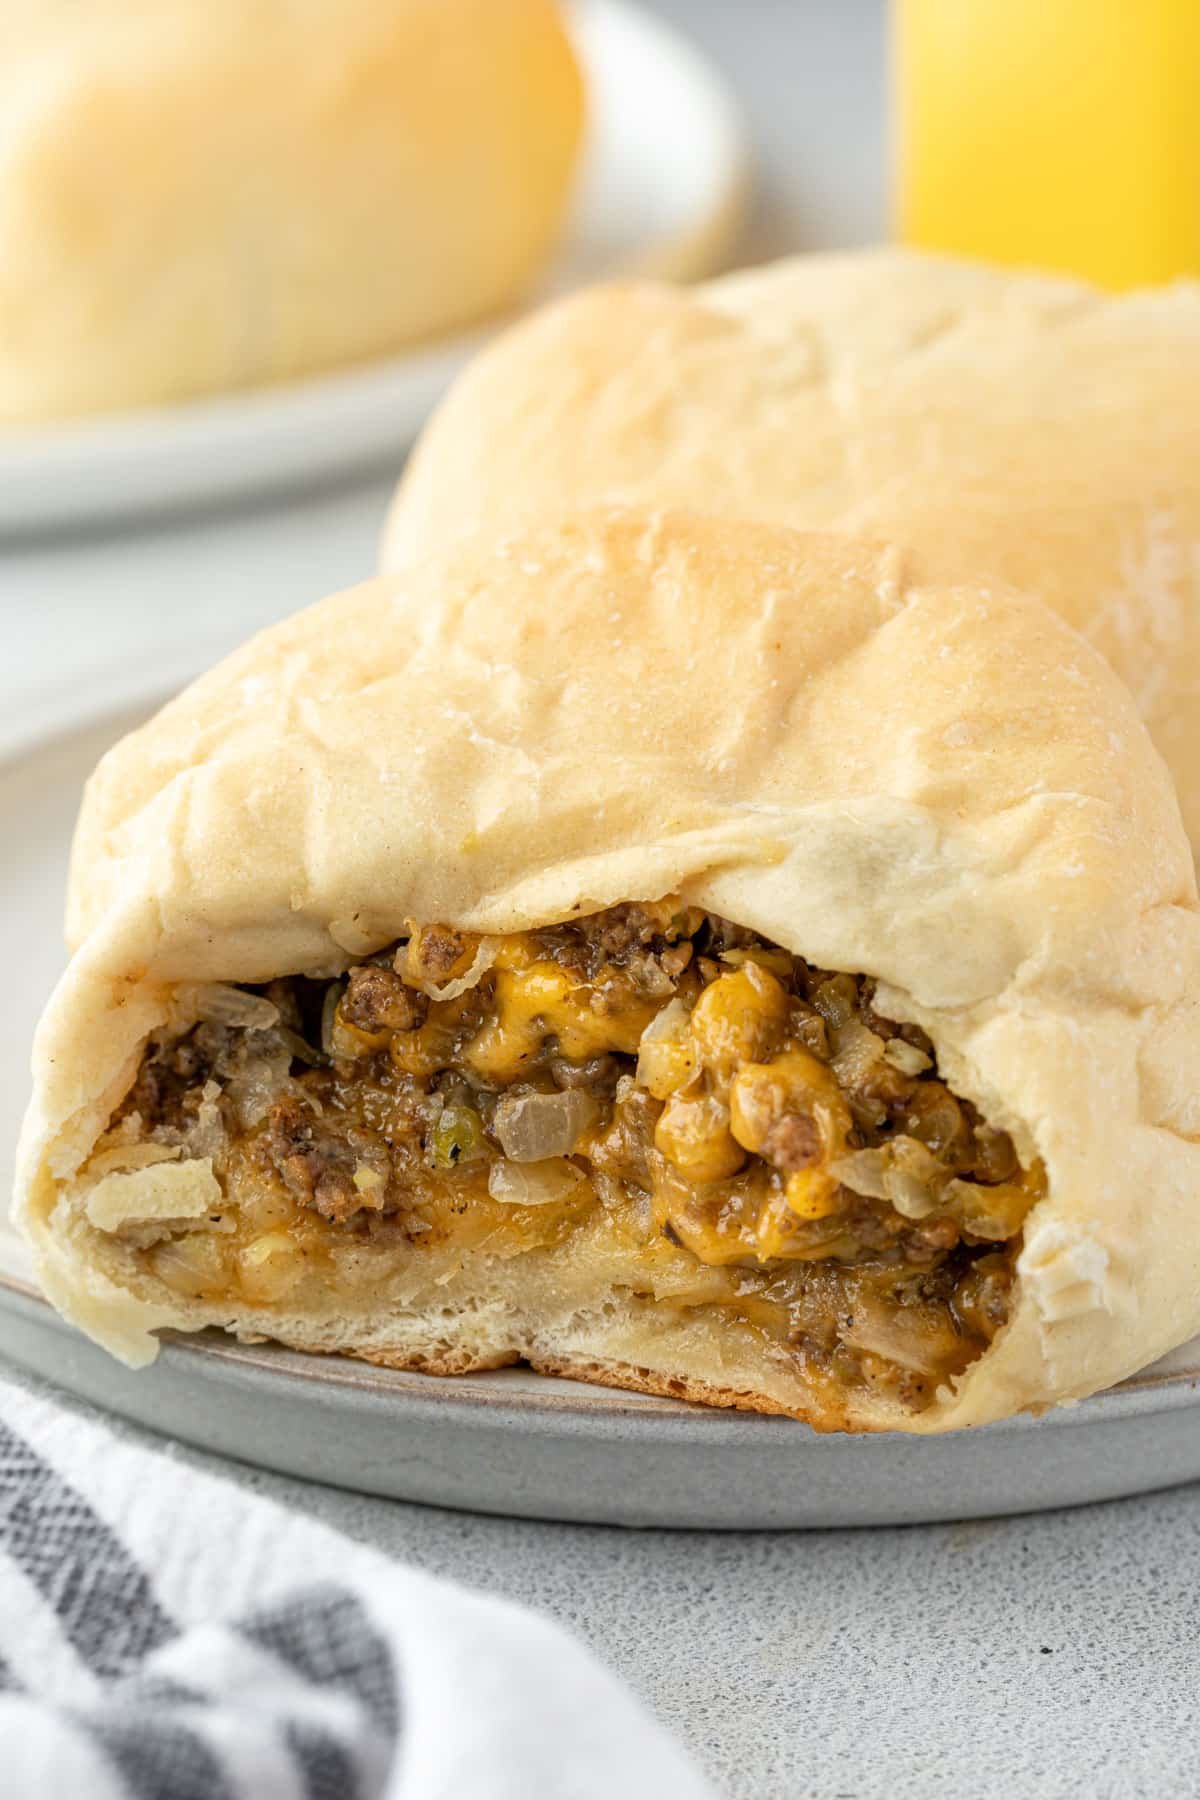 A bread sandwich pocked stuffed with ground beef and melty cheese.